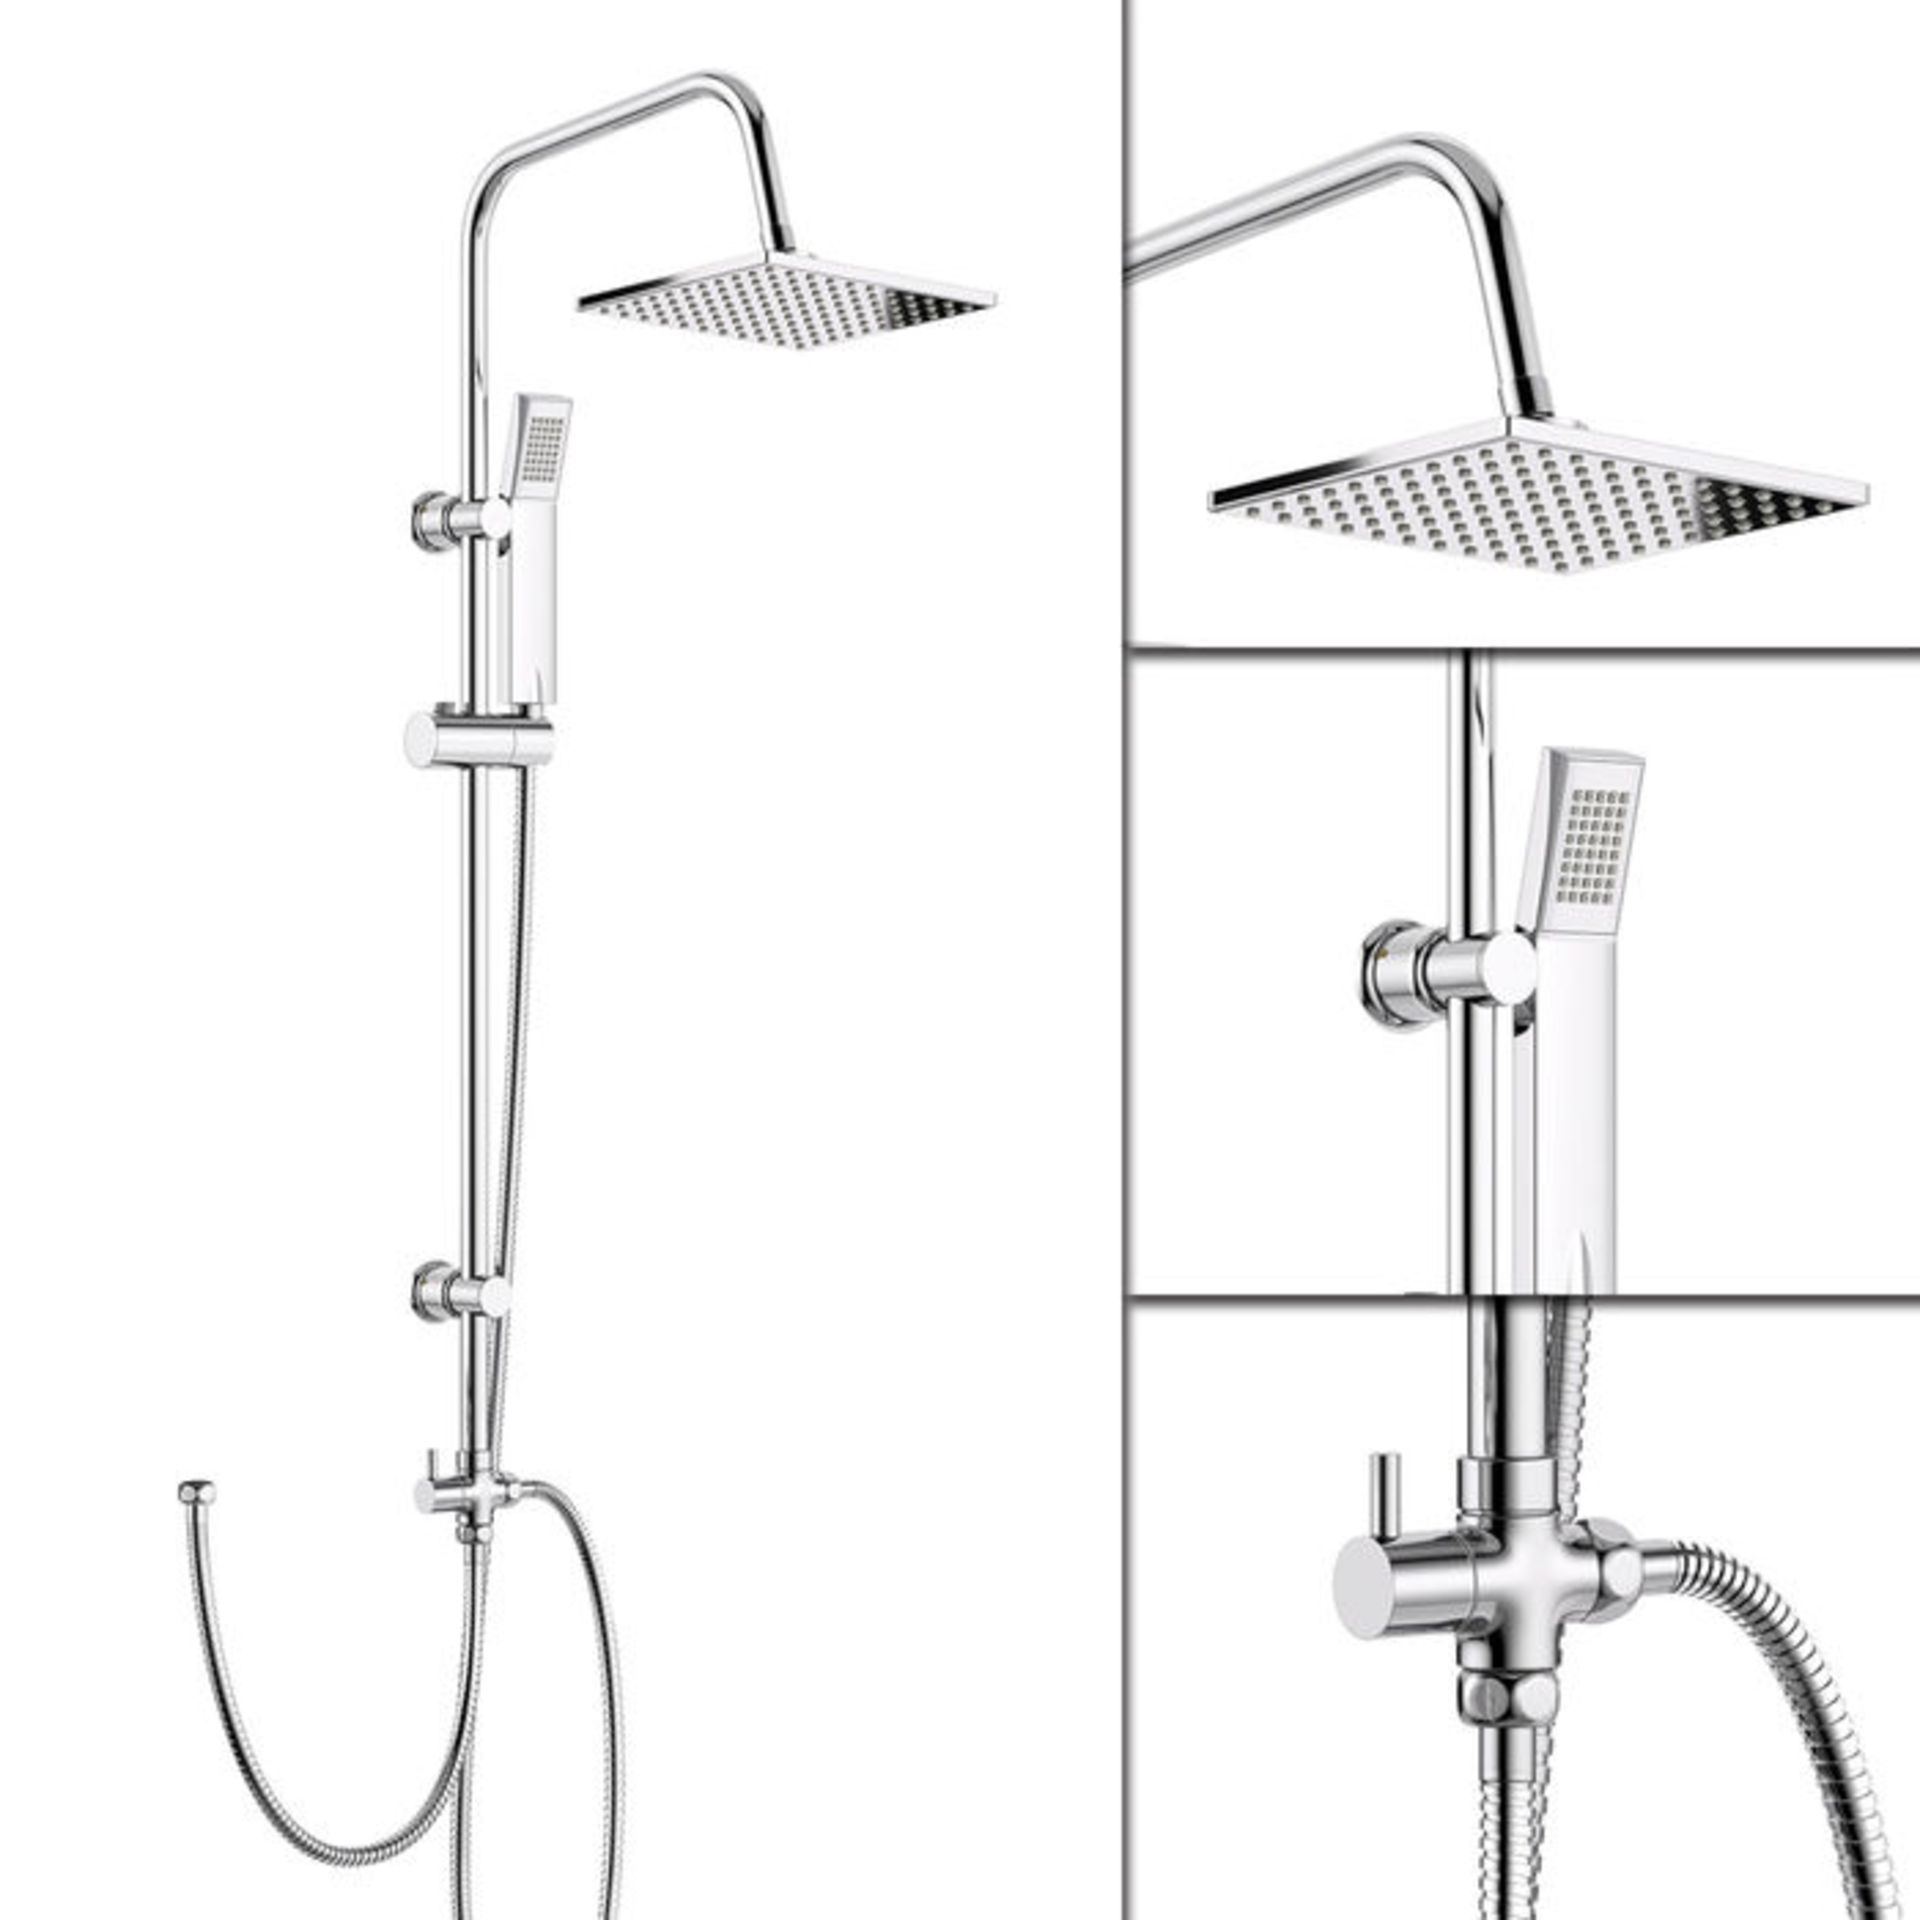 (TS213) 200mm Square Head, Riser Rail & Handheld Kit. Quality stainless steel shower head with - Image 3 of 4